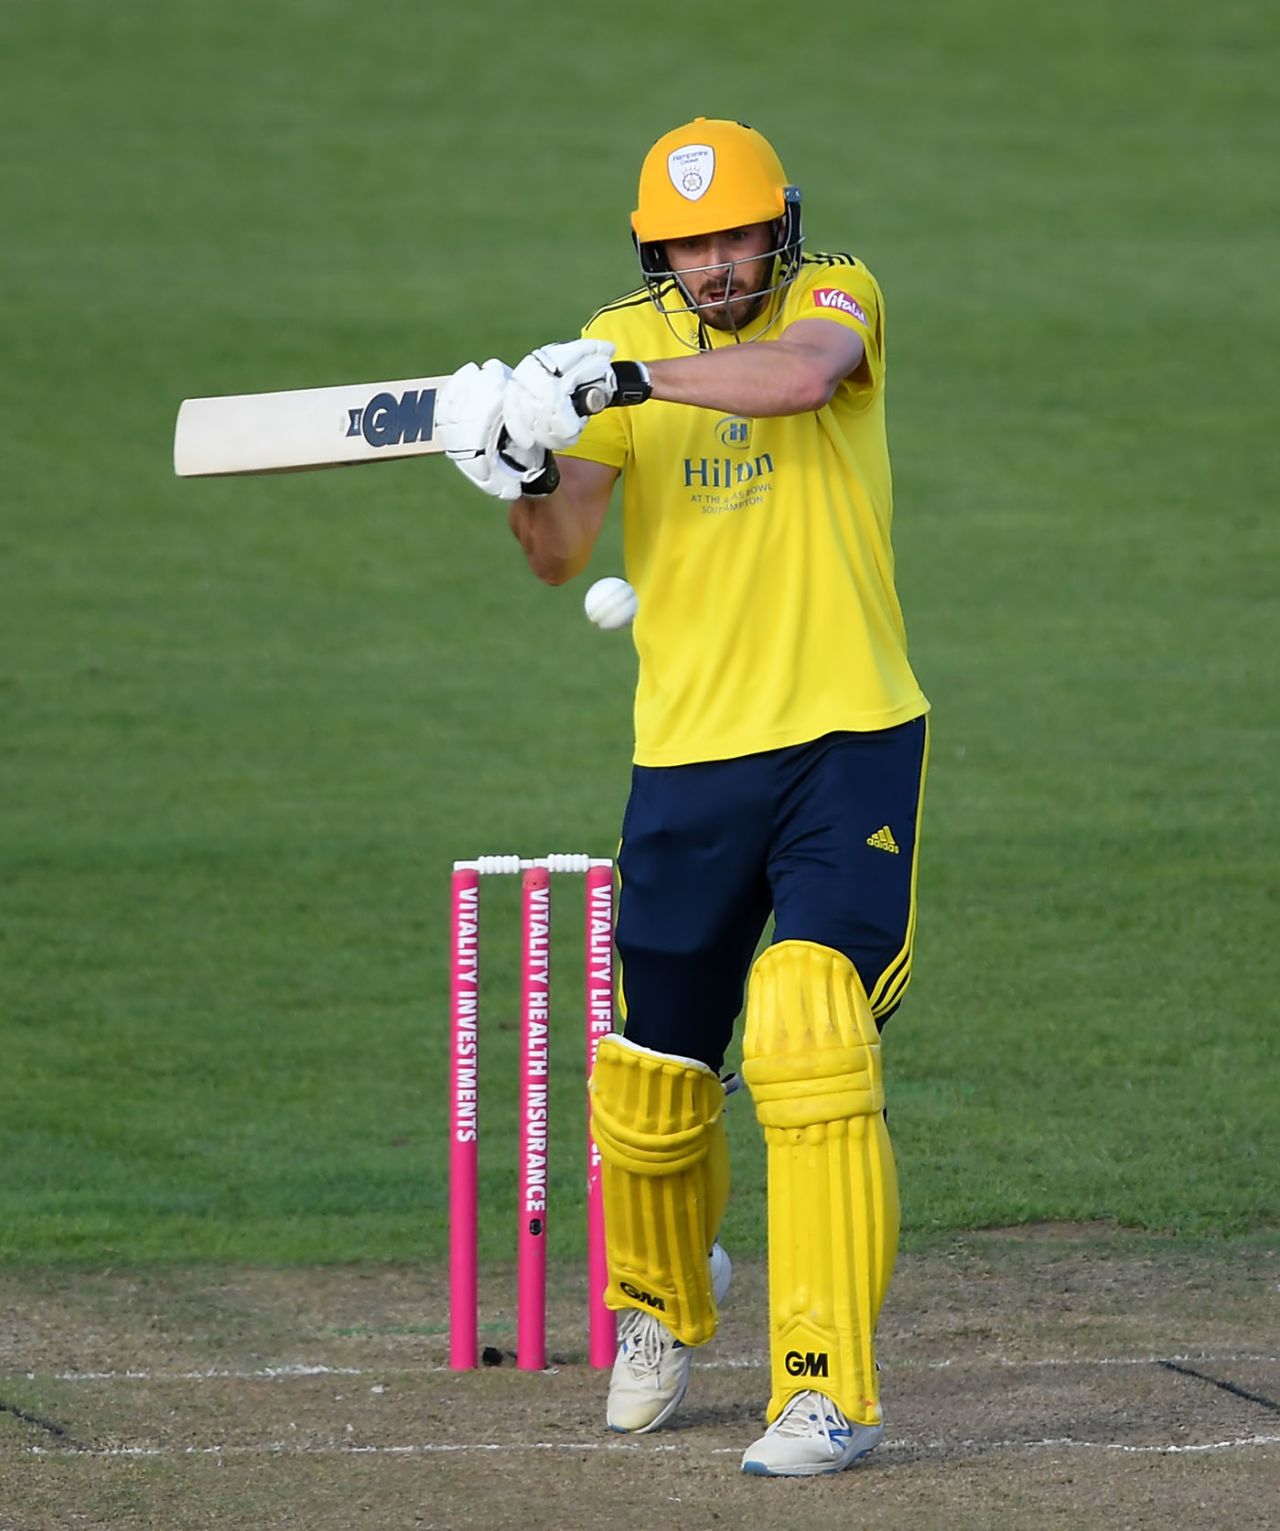 James Vince climbs into a pull shot, Gloucestershire v Hampshire, Bristol, August 13, 2019